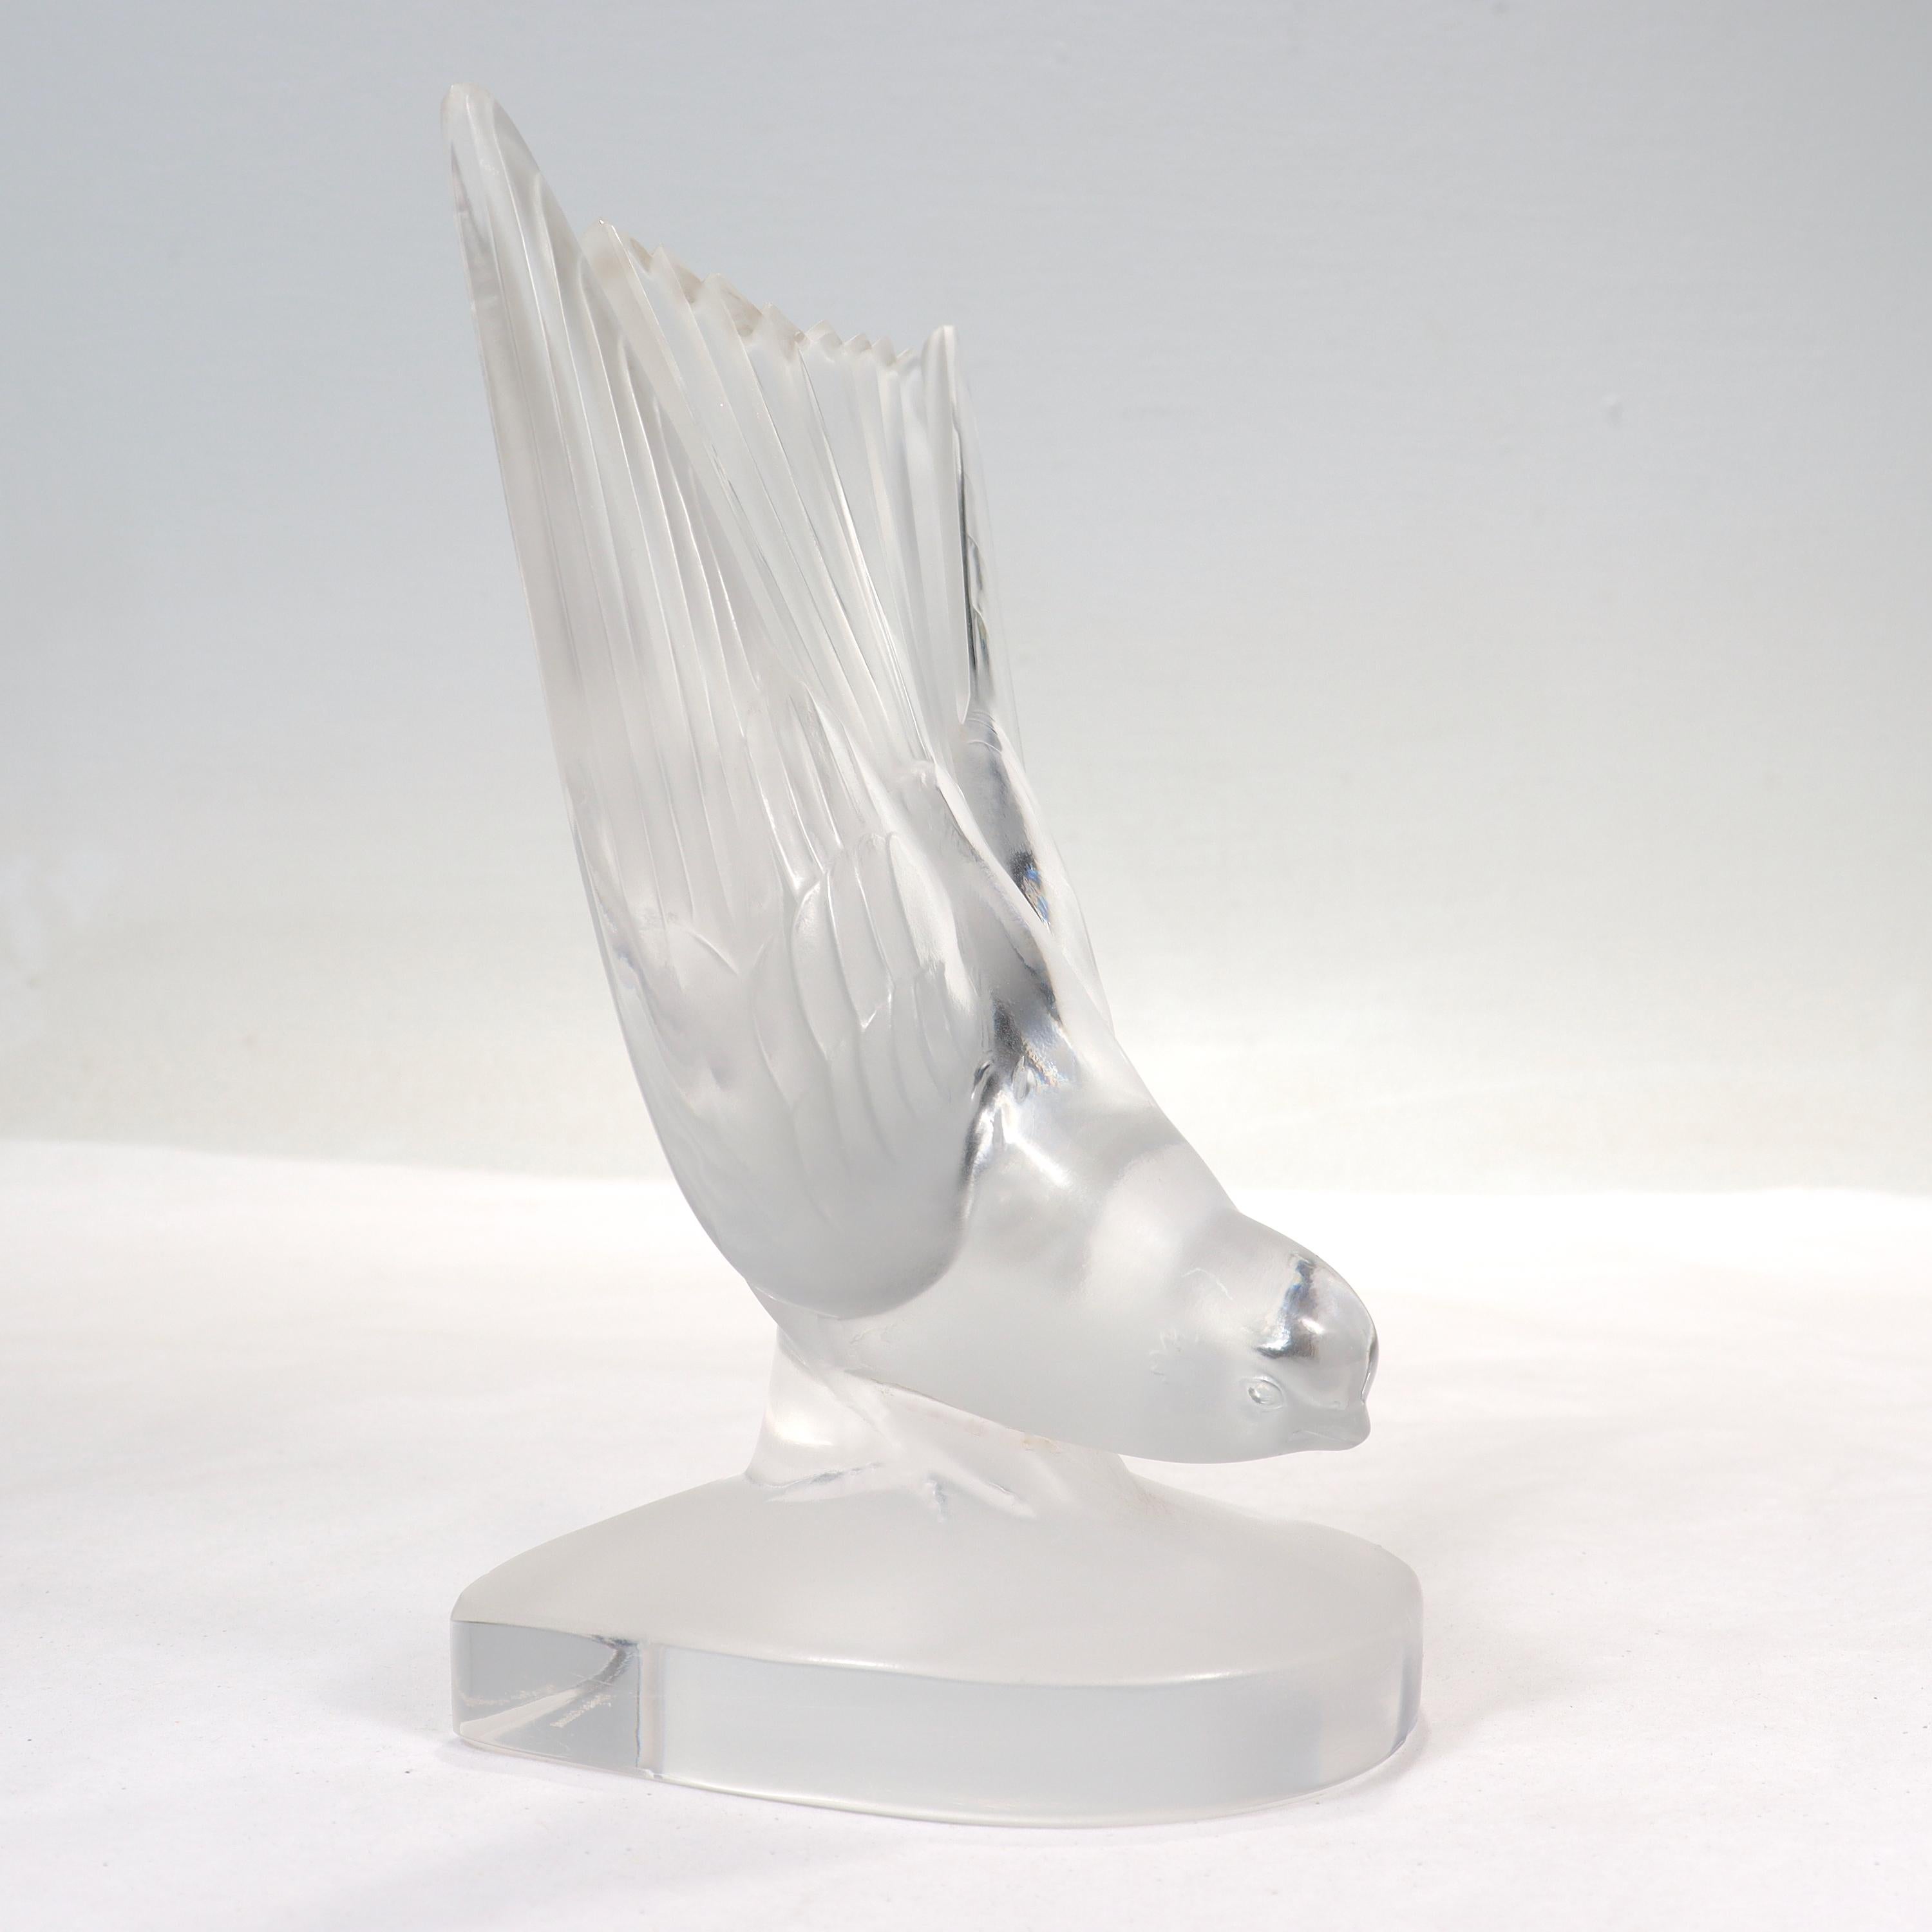 A fine French art glass bookend or paperweight.

By Lalique. 

In the form of a diving swallow bird.

Etched to the base with a 'Lalique France' mark.

Simply a lovely piece of glass from Lalique!

Date:
20th Century

Overall Condition:
They are in